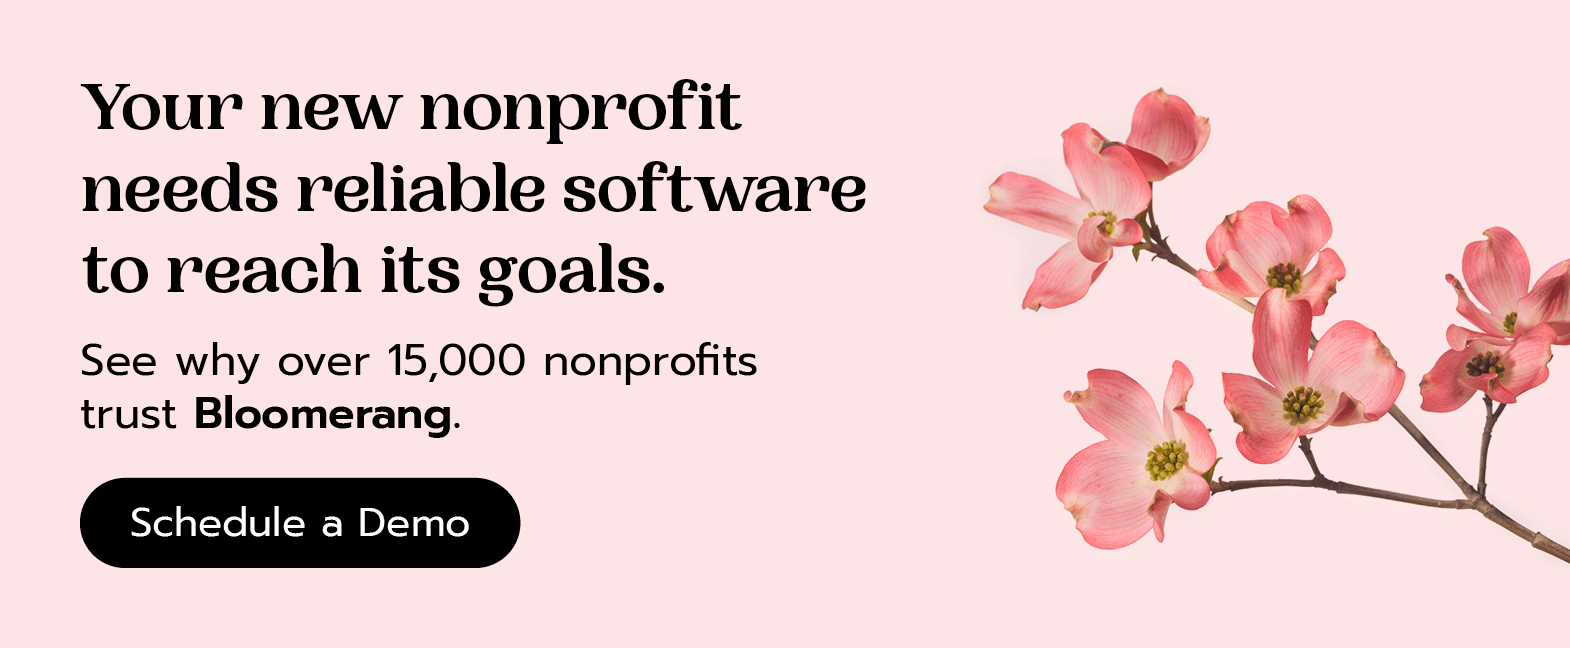 New nonprofits need reliable software tools to maximize their reach. See why over 15,000 nonprofits trust Bloomerang. Schedule a demo here.